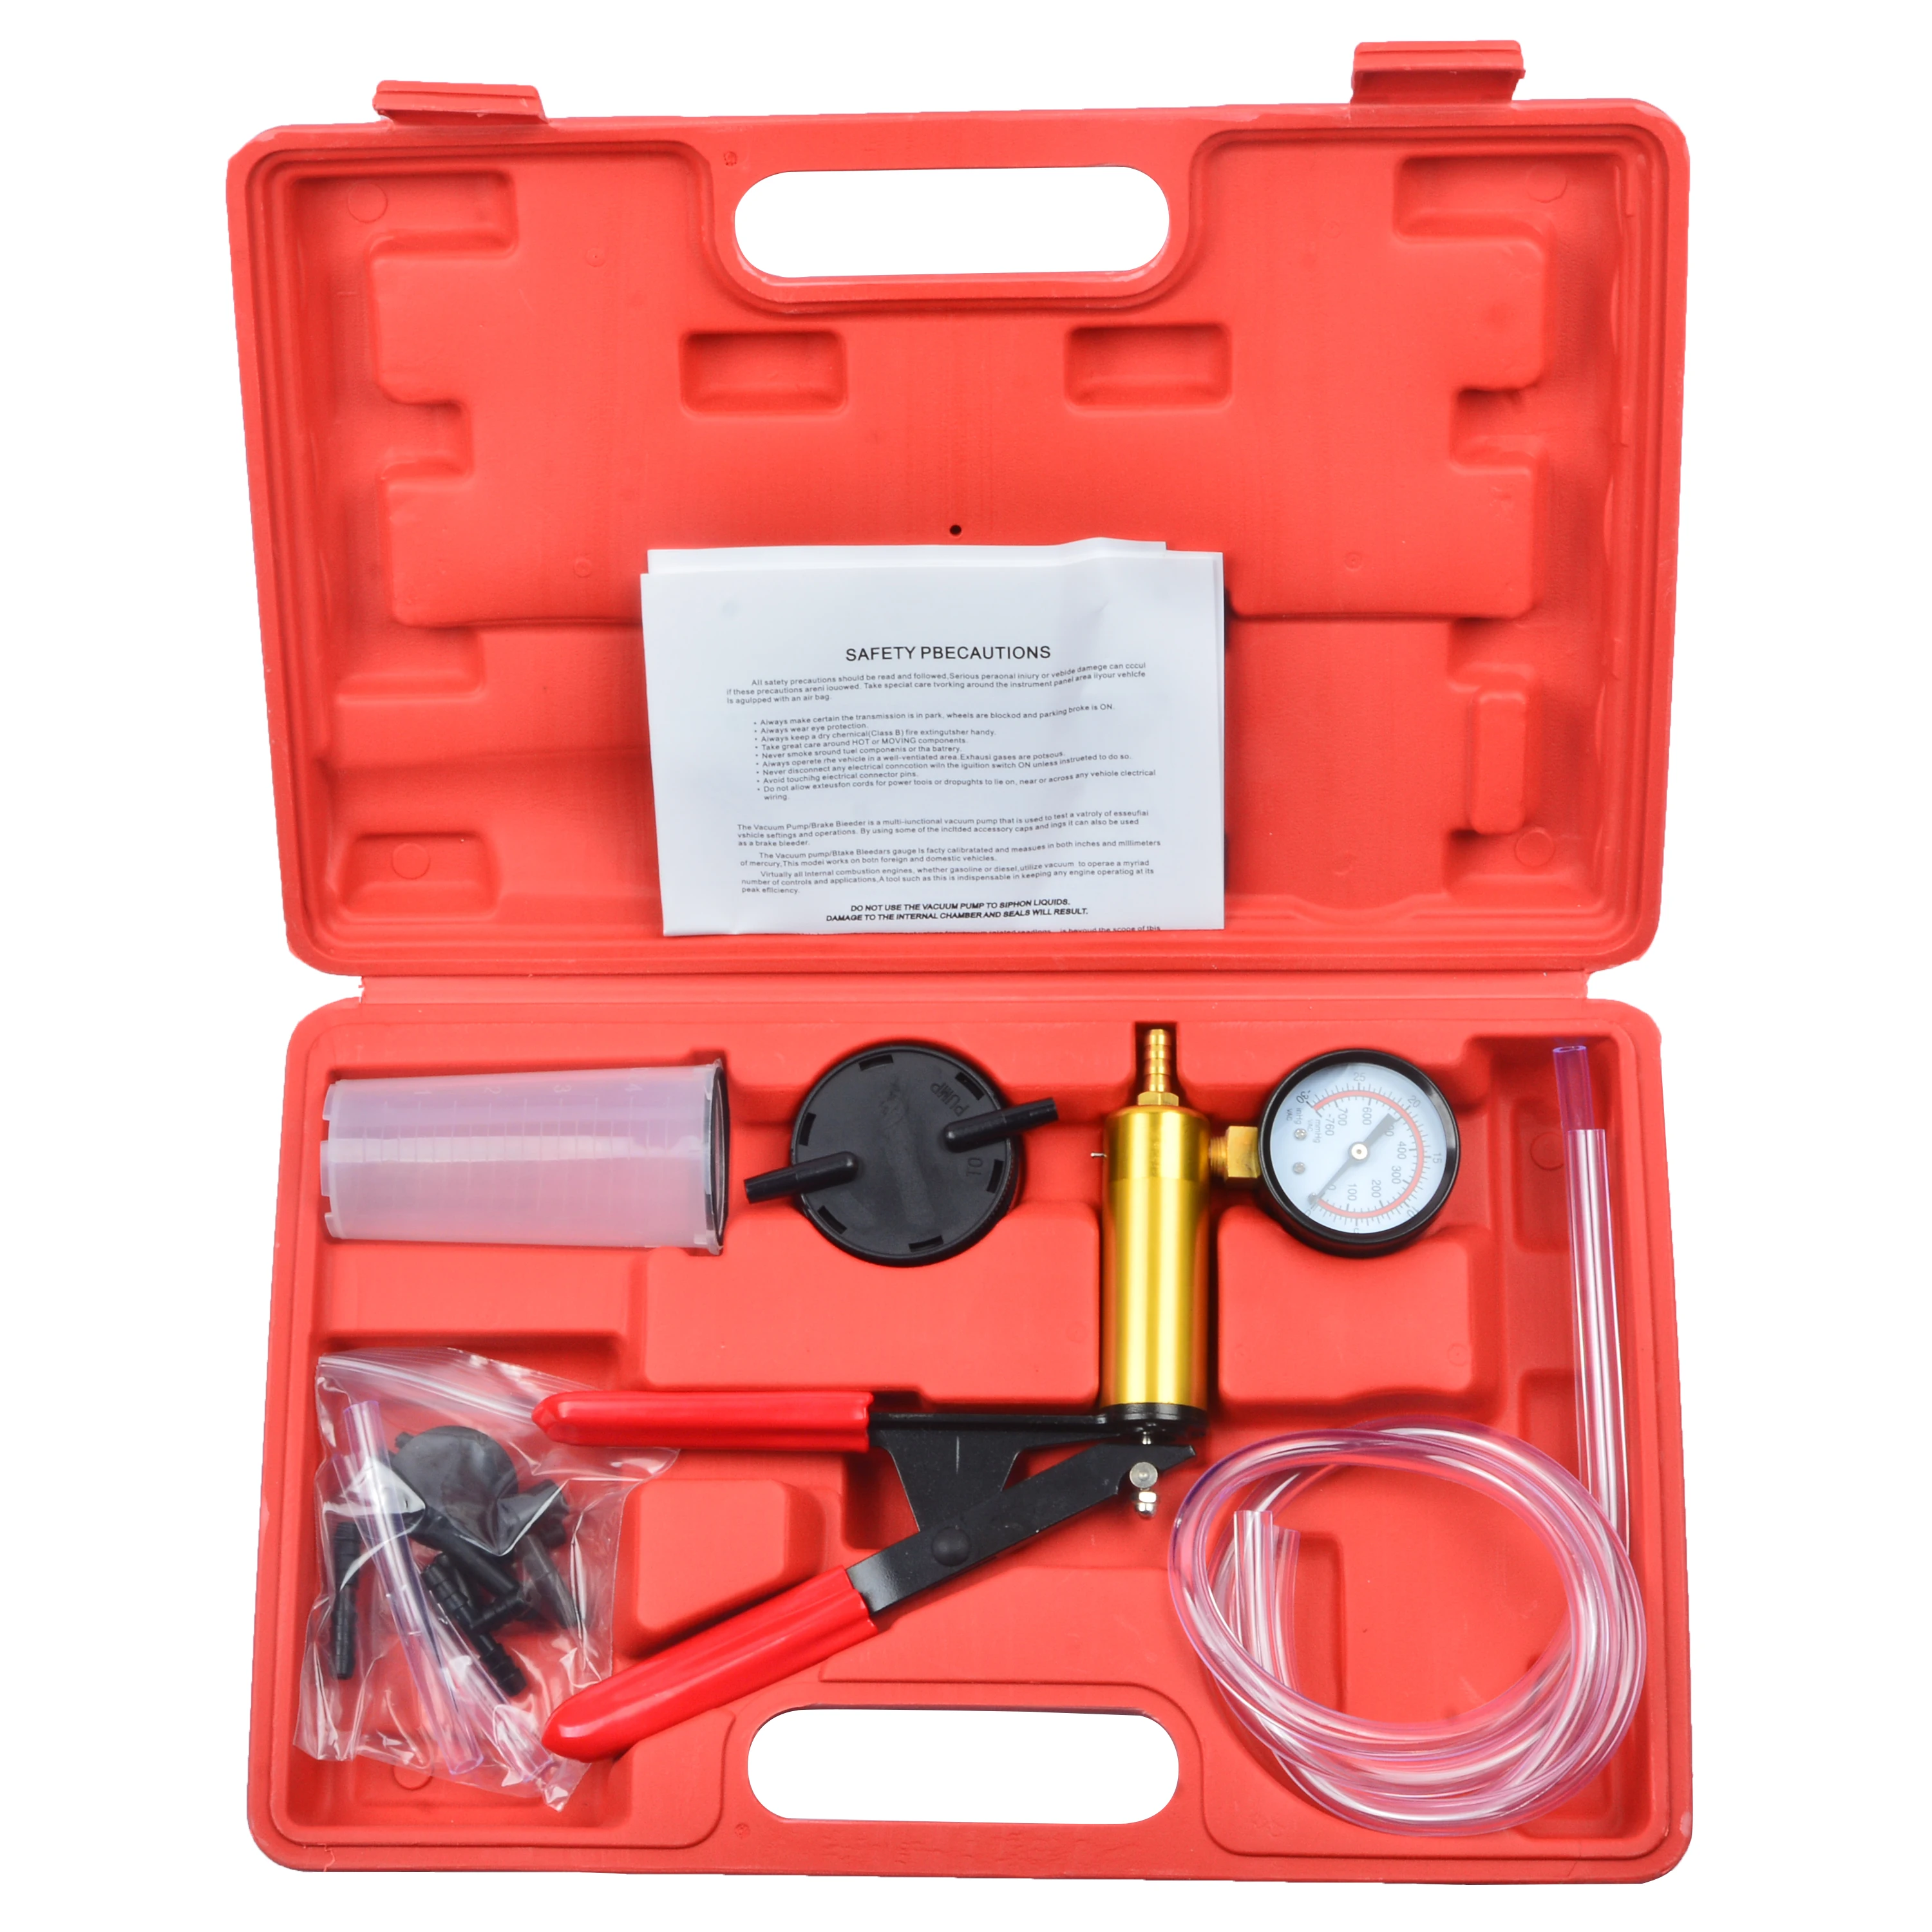 TRIL GEAR 2 in 1 Hand Geld Brake Bleeder & Vacuum Pump Tester Test Tuner Tool Kit for Automotive with Adapters Case 